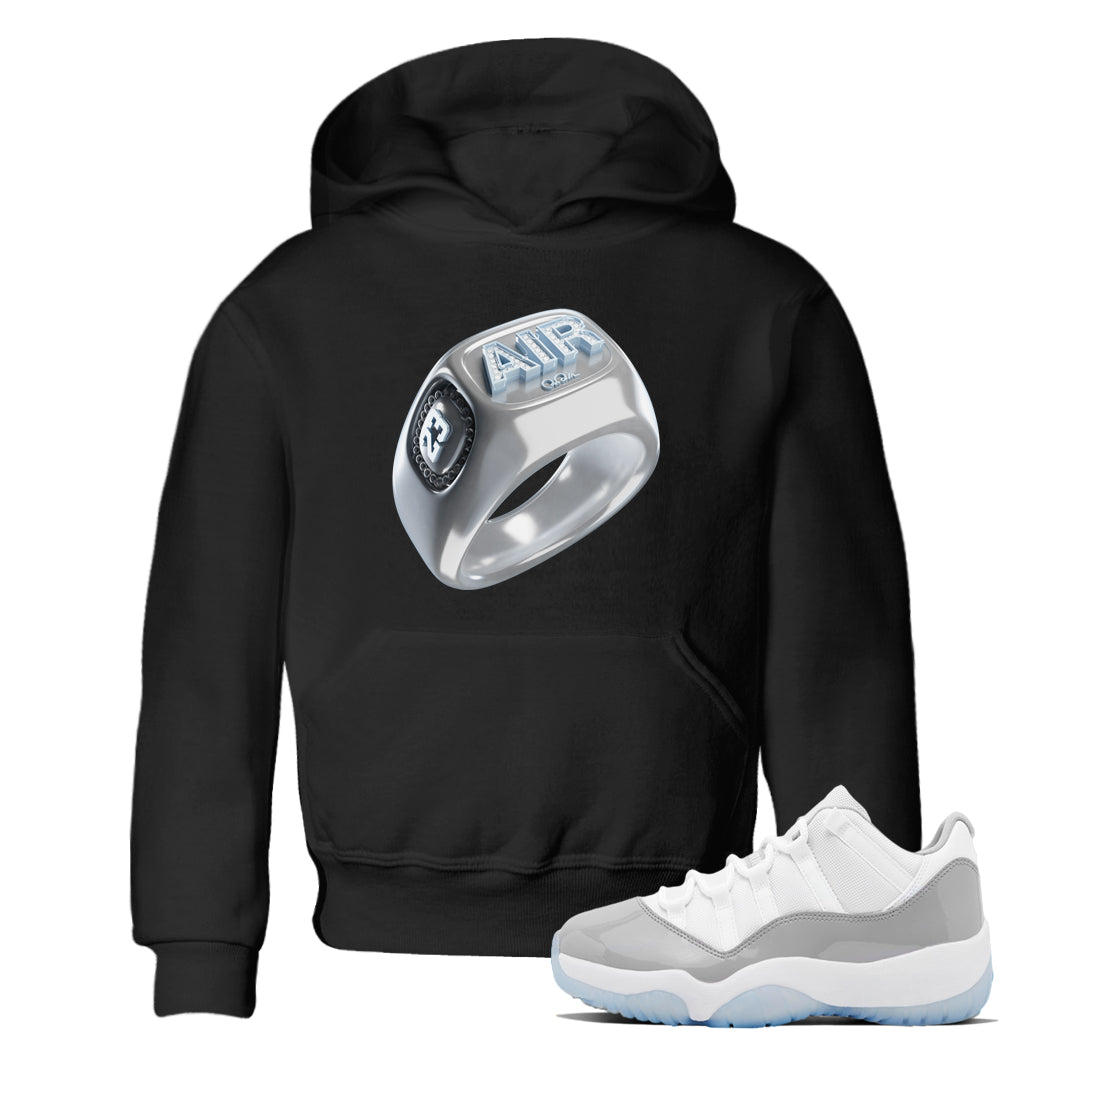 Air Jordan 11 White Cement Diamond Ring Baby and Kids Sneaker Tees Air Jordan 11 Cement Grey Kids Sneaker Tees Washing and Care Tip